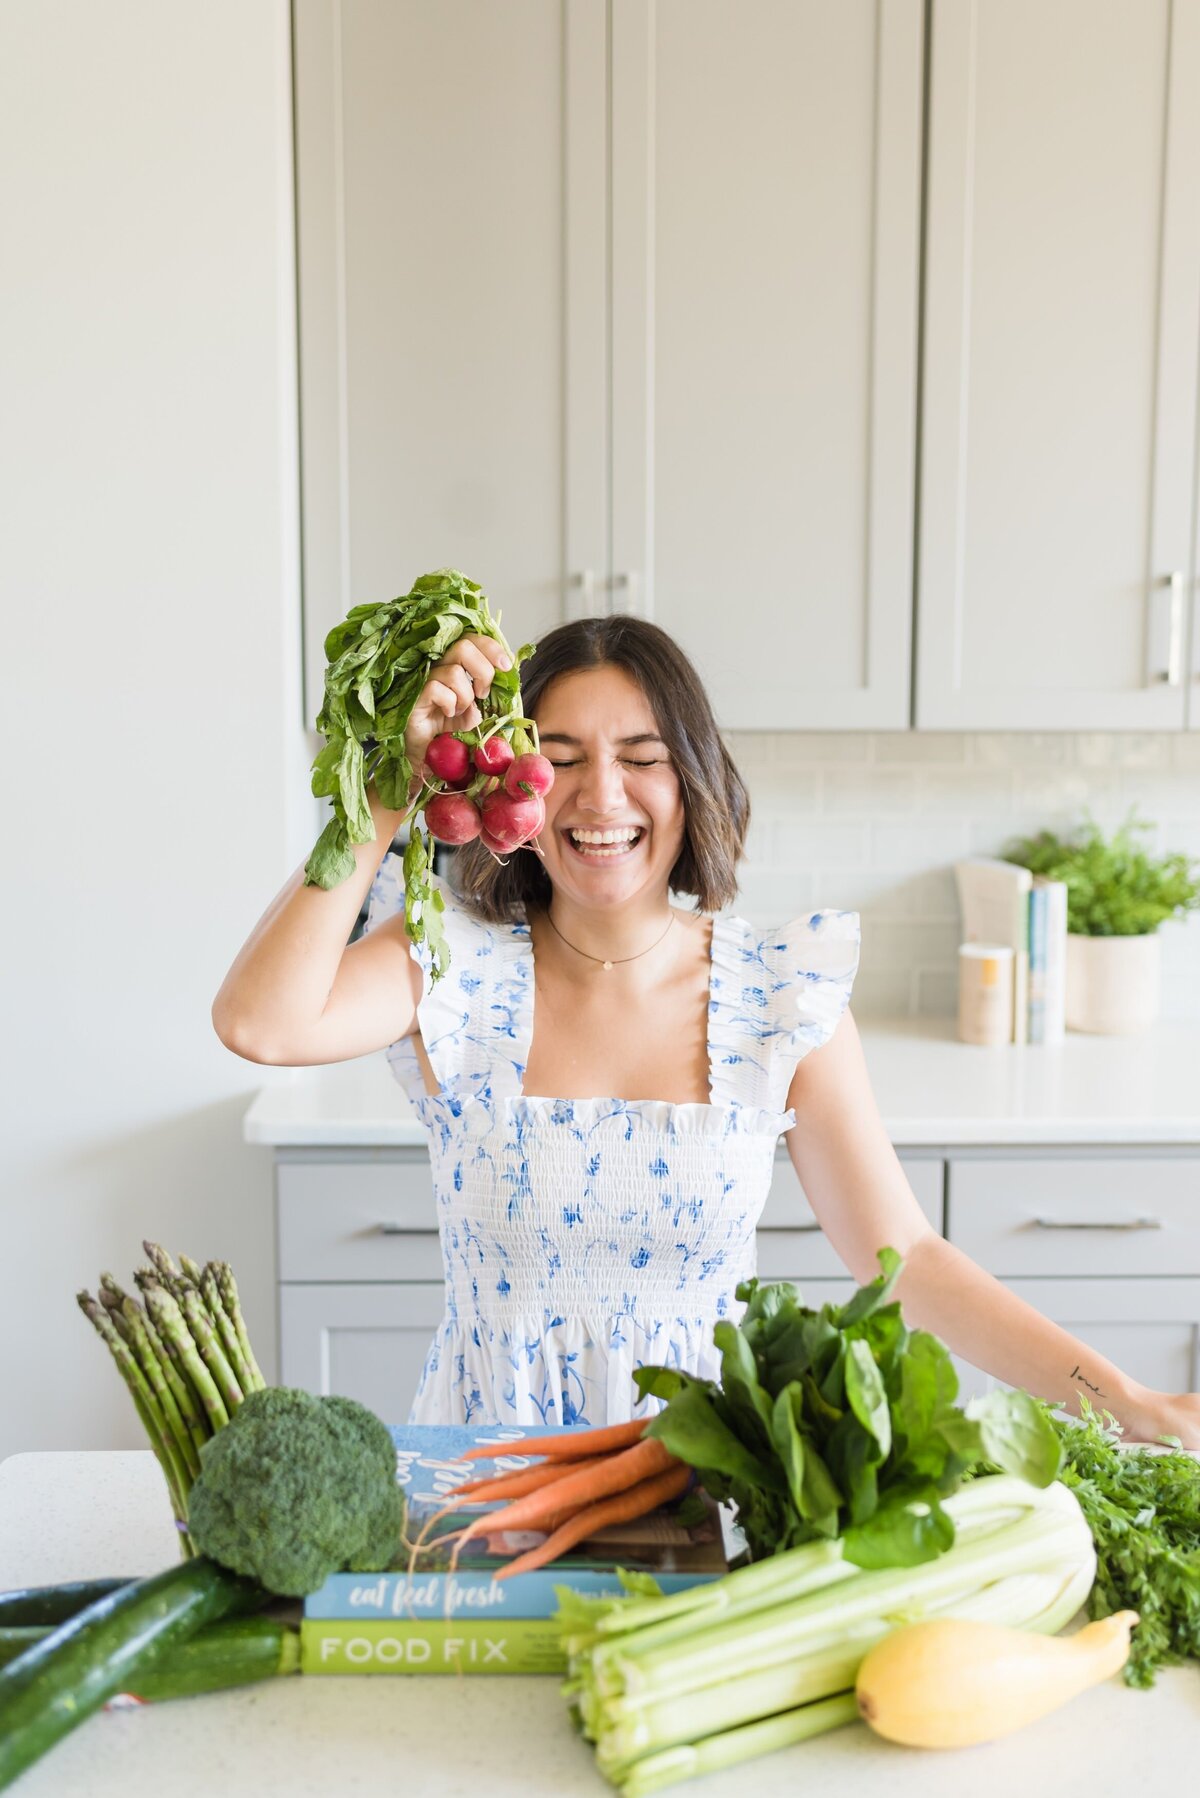 Nashville nutritionist and fitness coach with fresh fruits and veggies in the kitchen